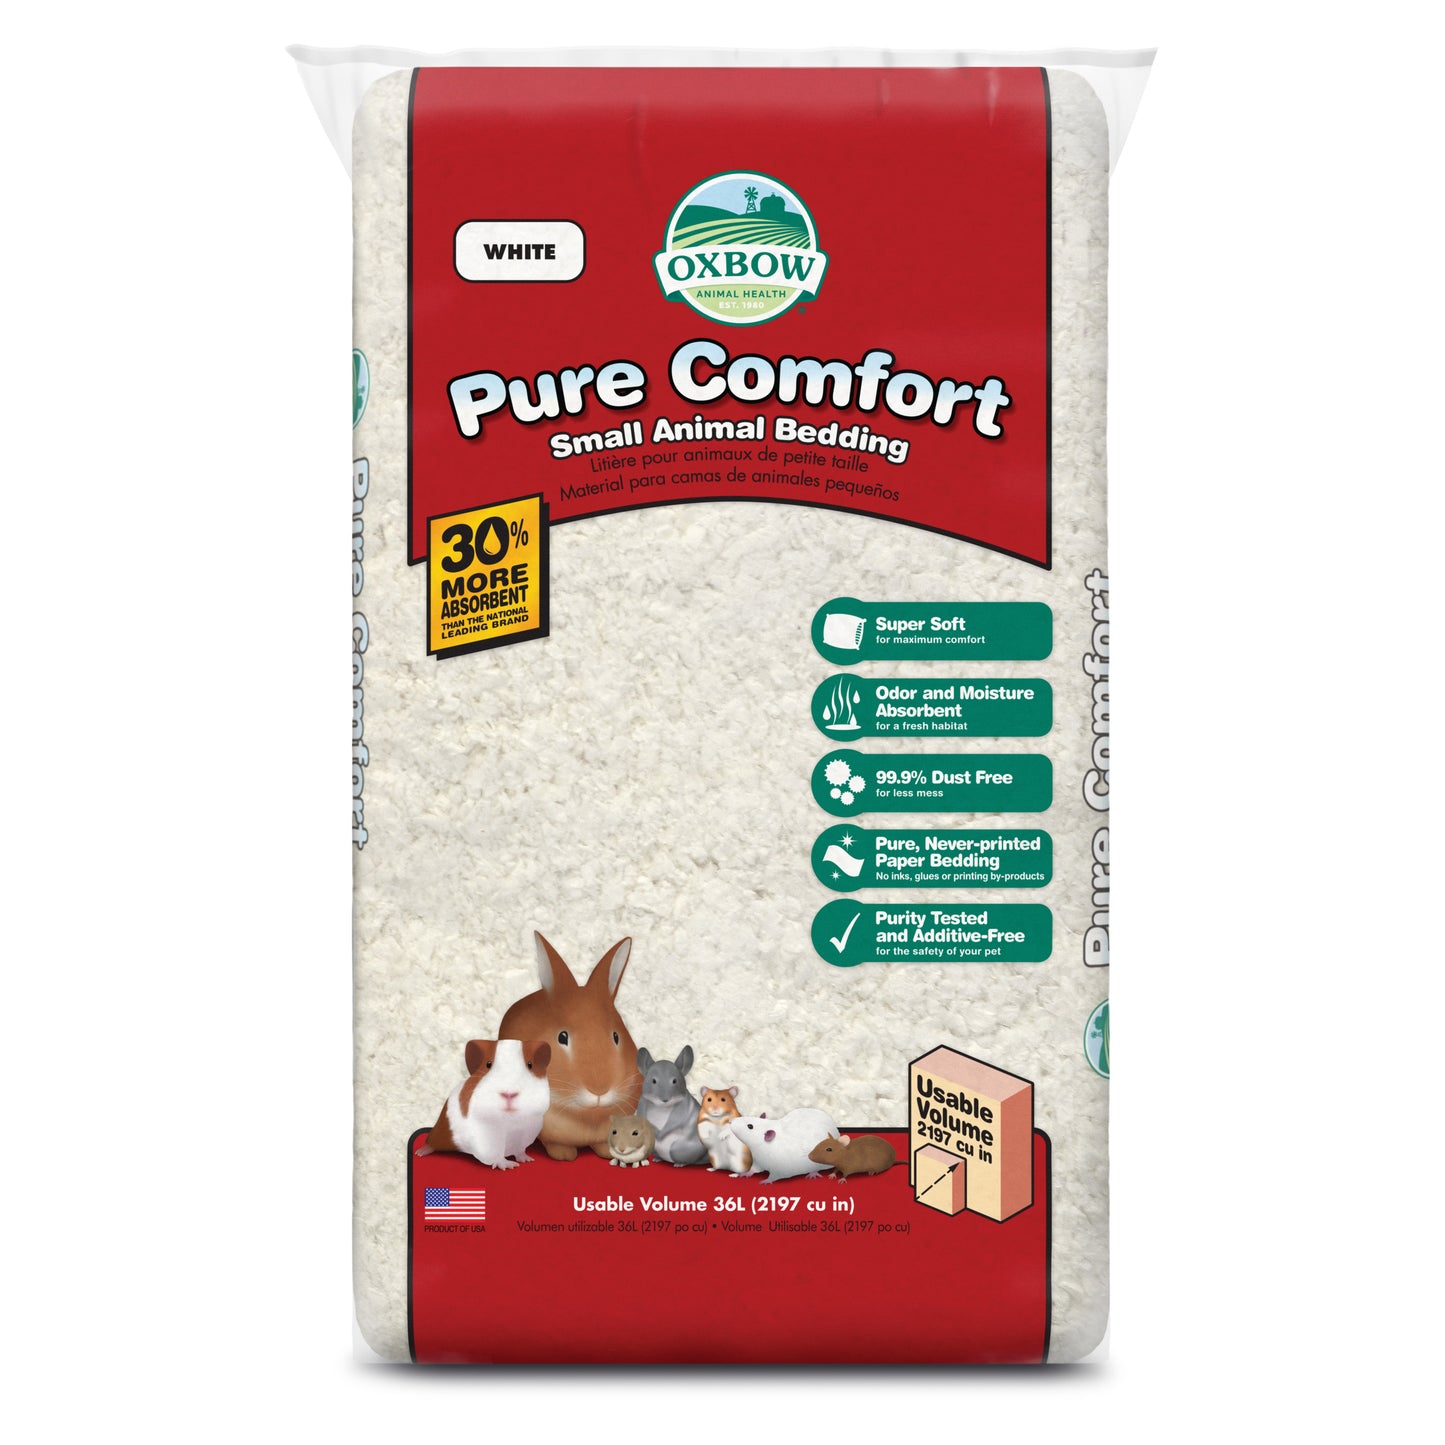 Pure Comfort Bedding - Oxbow White